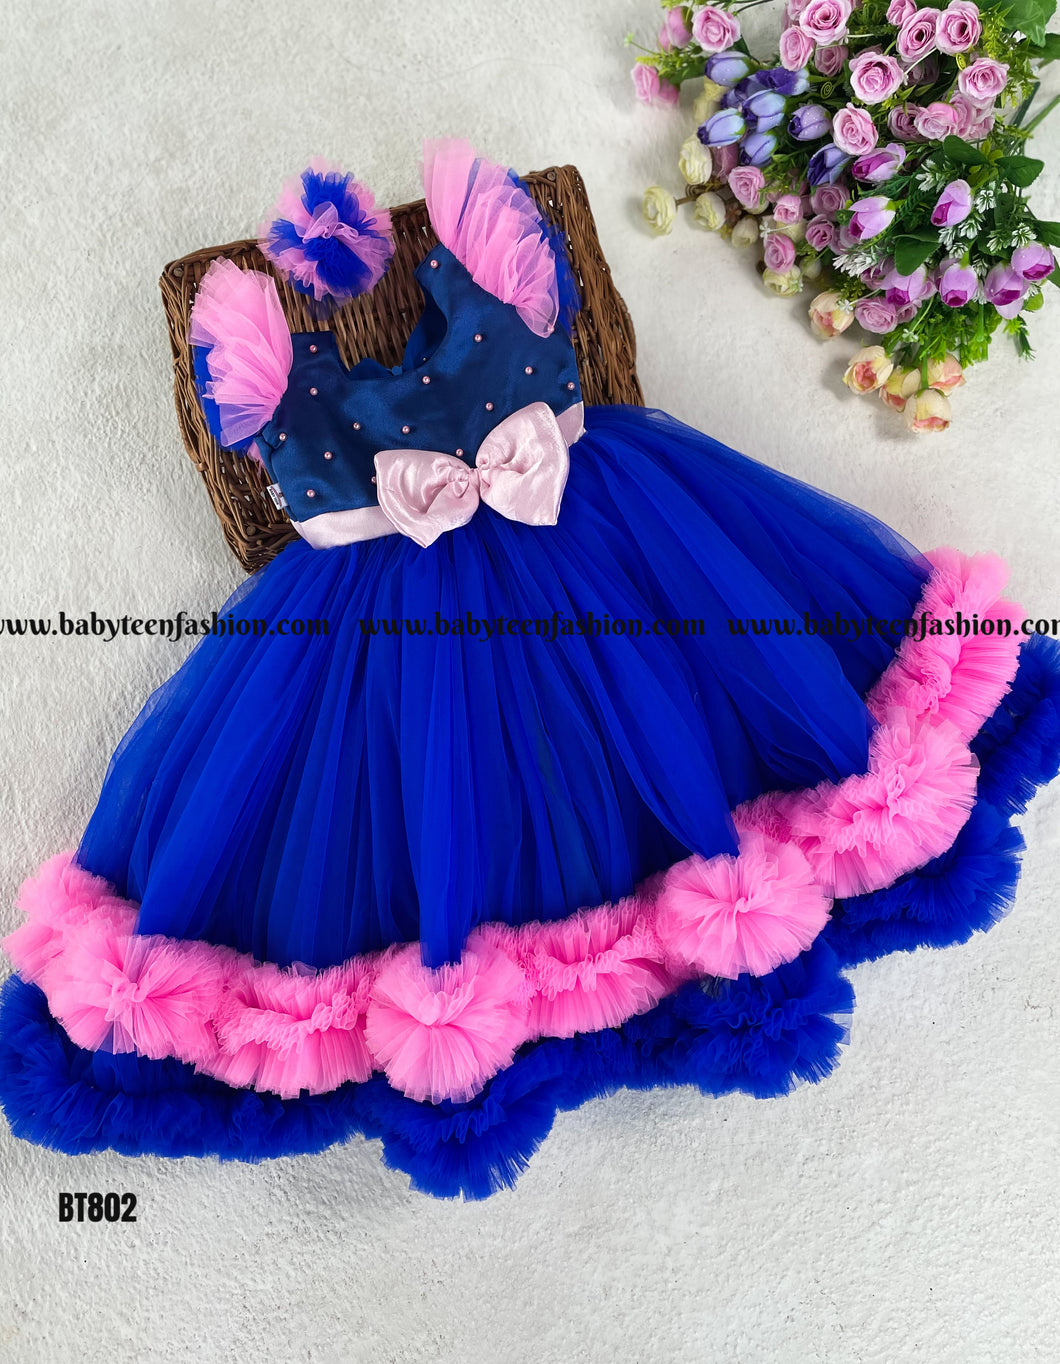 BT802 Pink Blue Fusion Frock